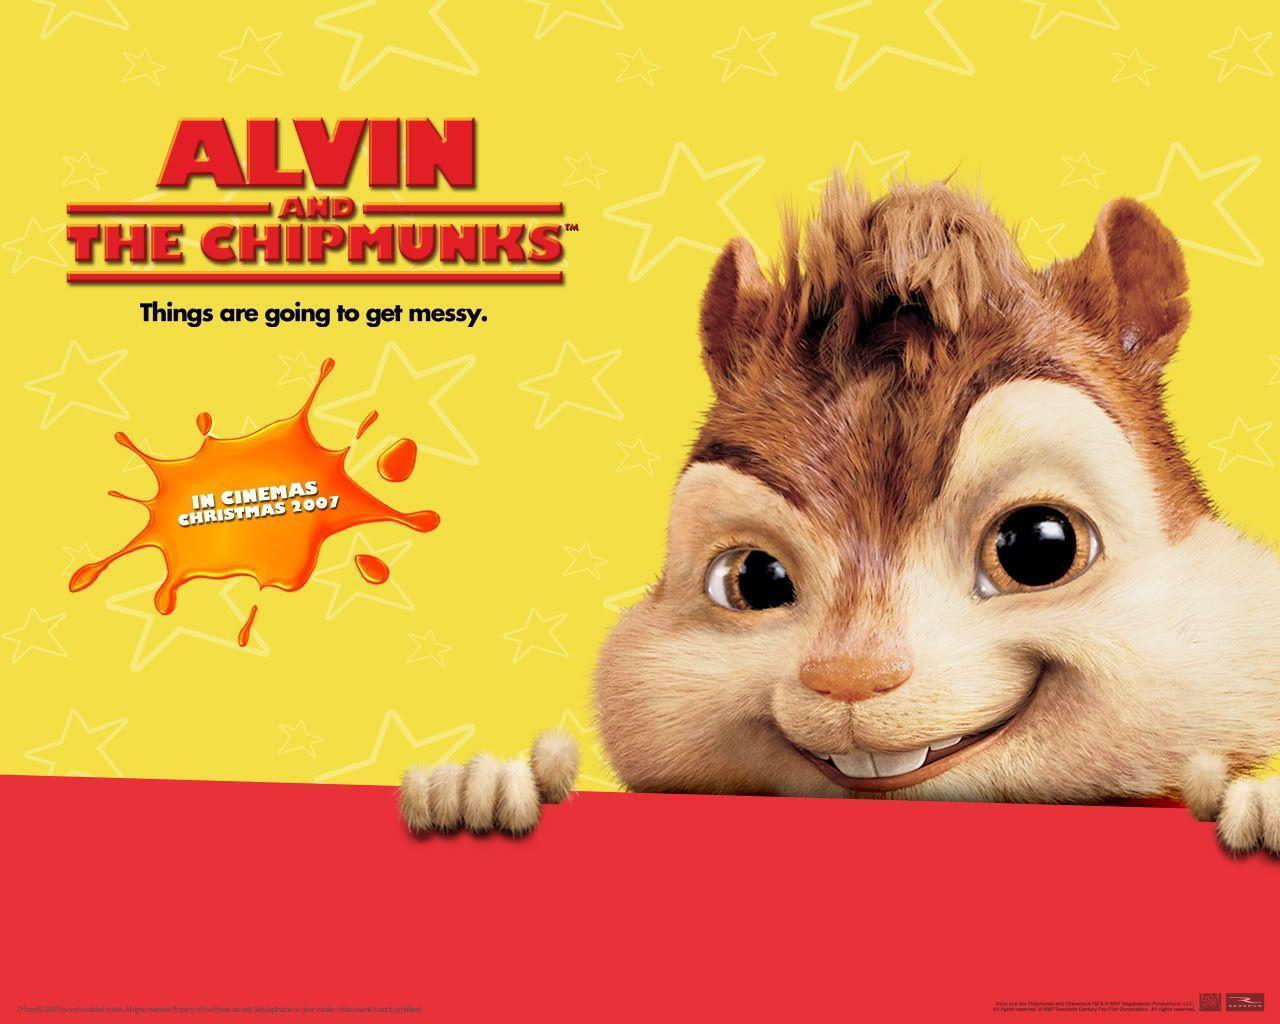 Alvin and the Chipmunks Wallpaper picture, Alvin and the Chipmunks